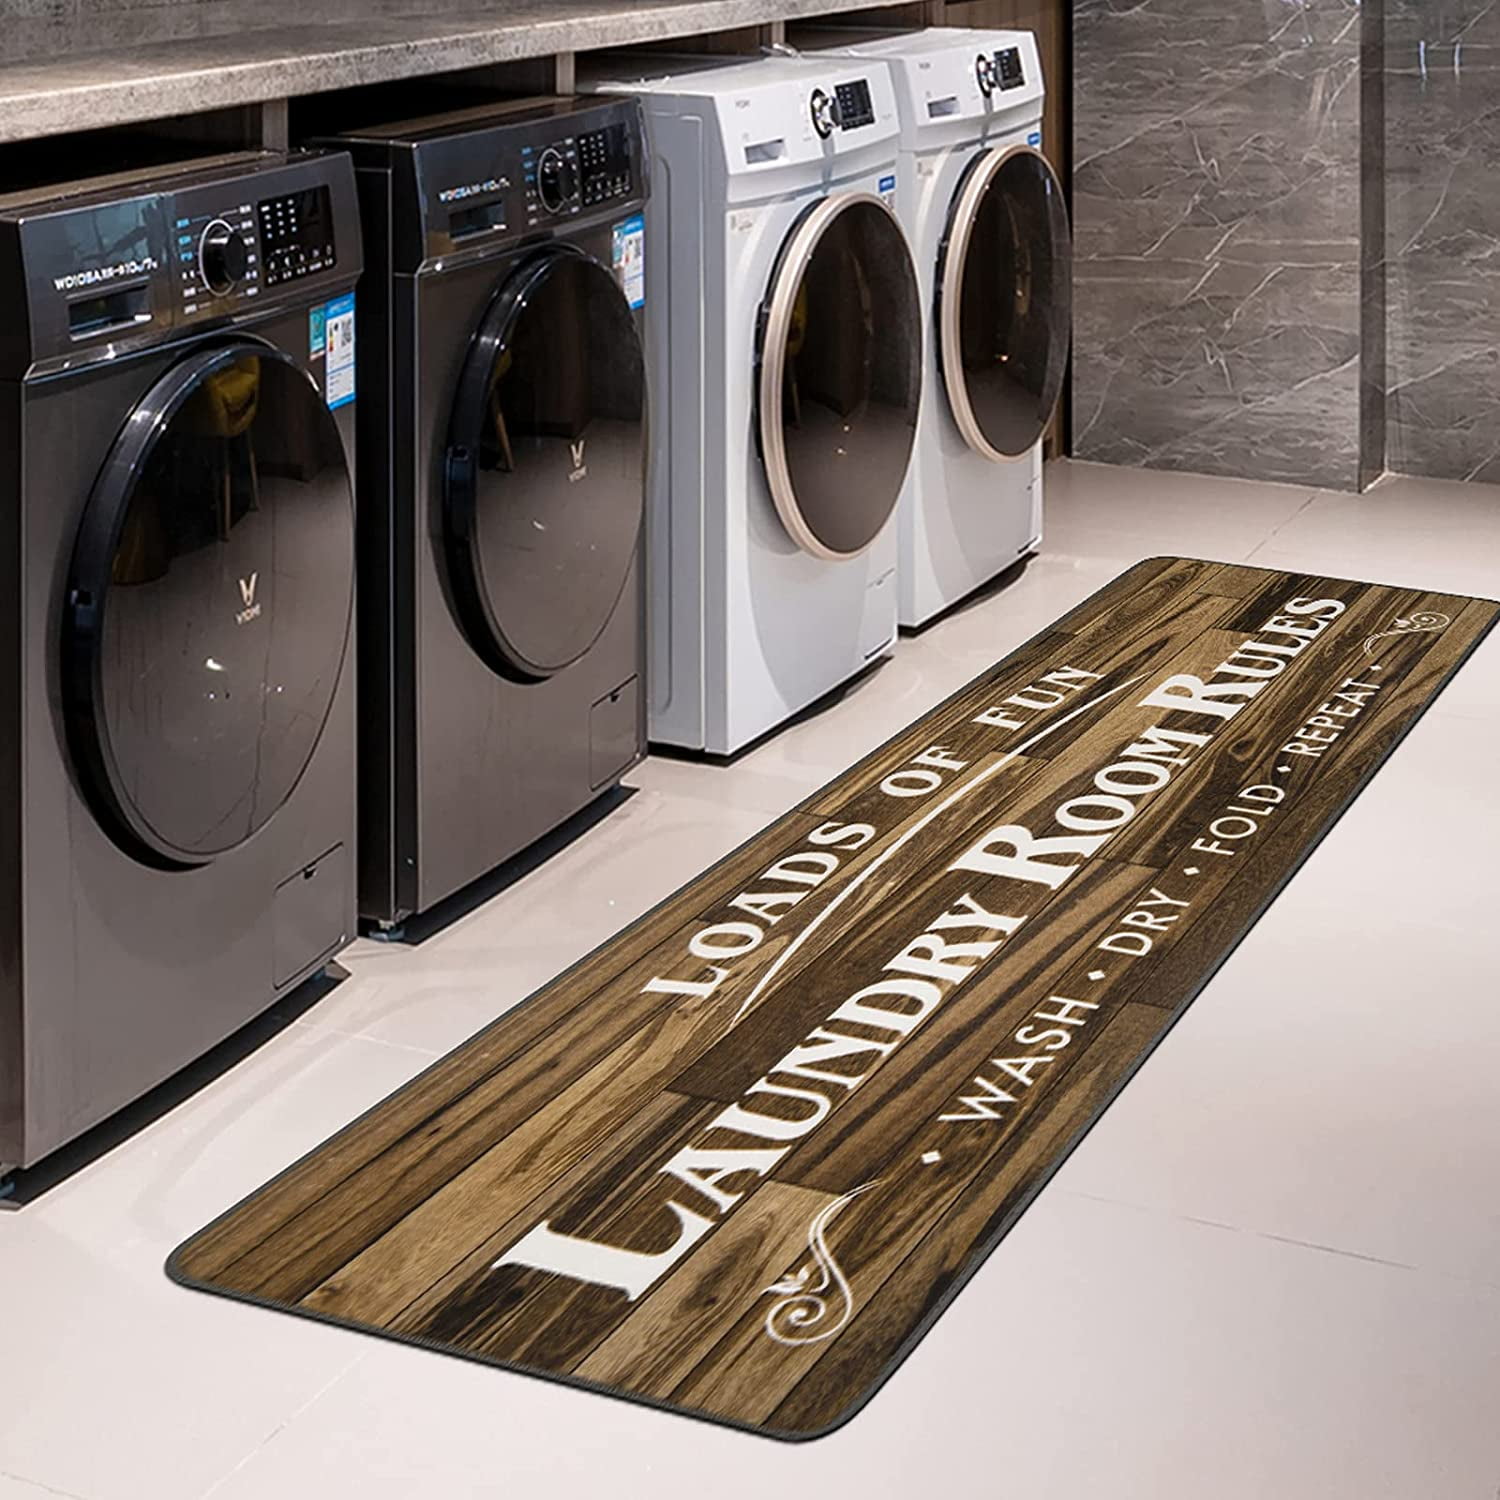 Black Laundry Rug for Laundry Room Farmhouse Decor Runner Rugs Machine Washable Laundry Mat 72x24in